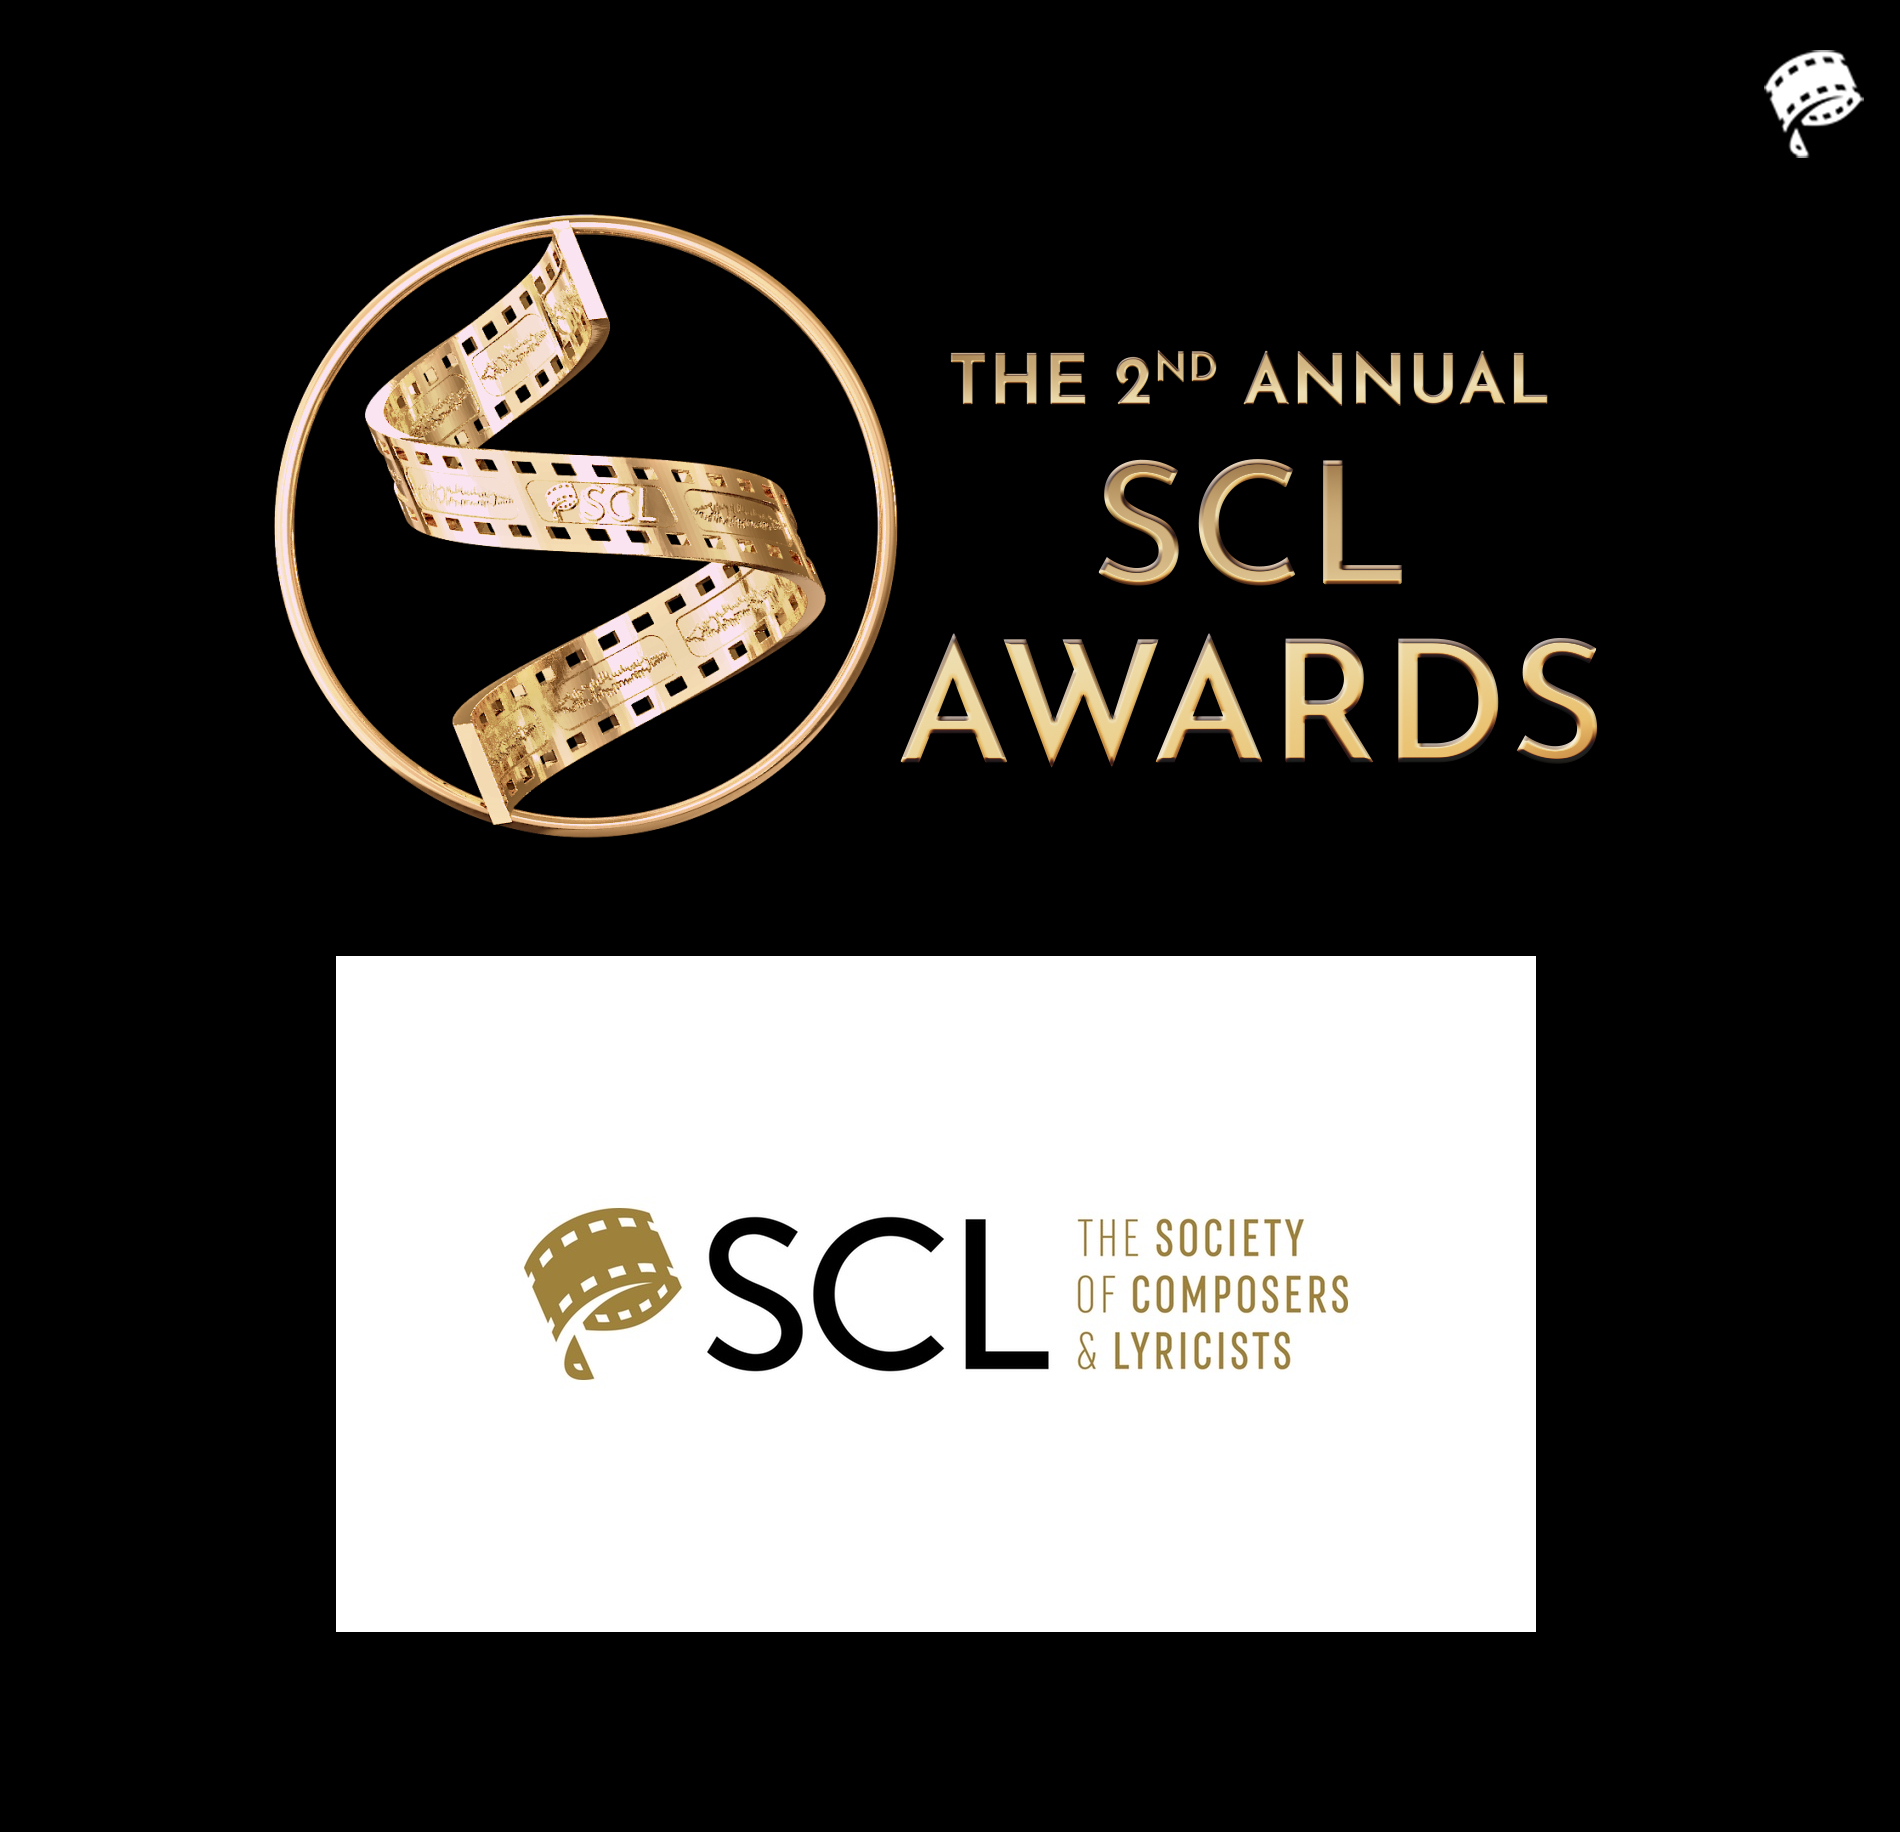 2nd Annual Society of Composers & Lyricists Awards